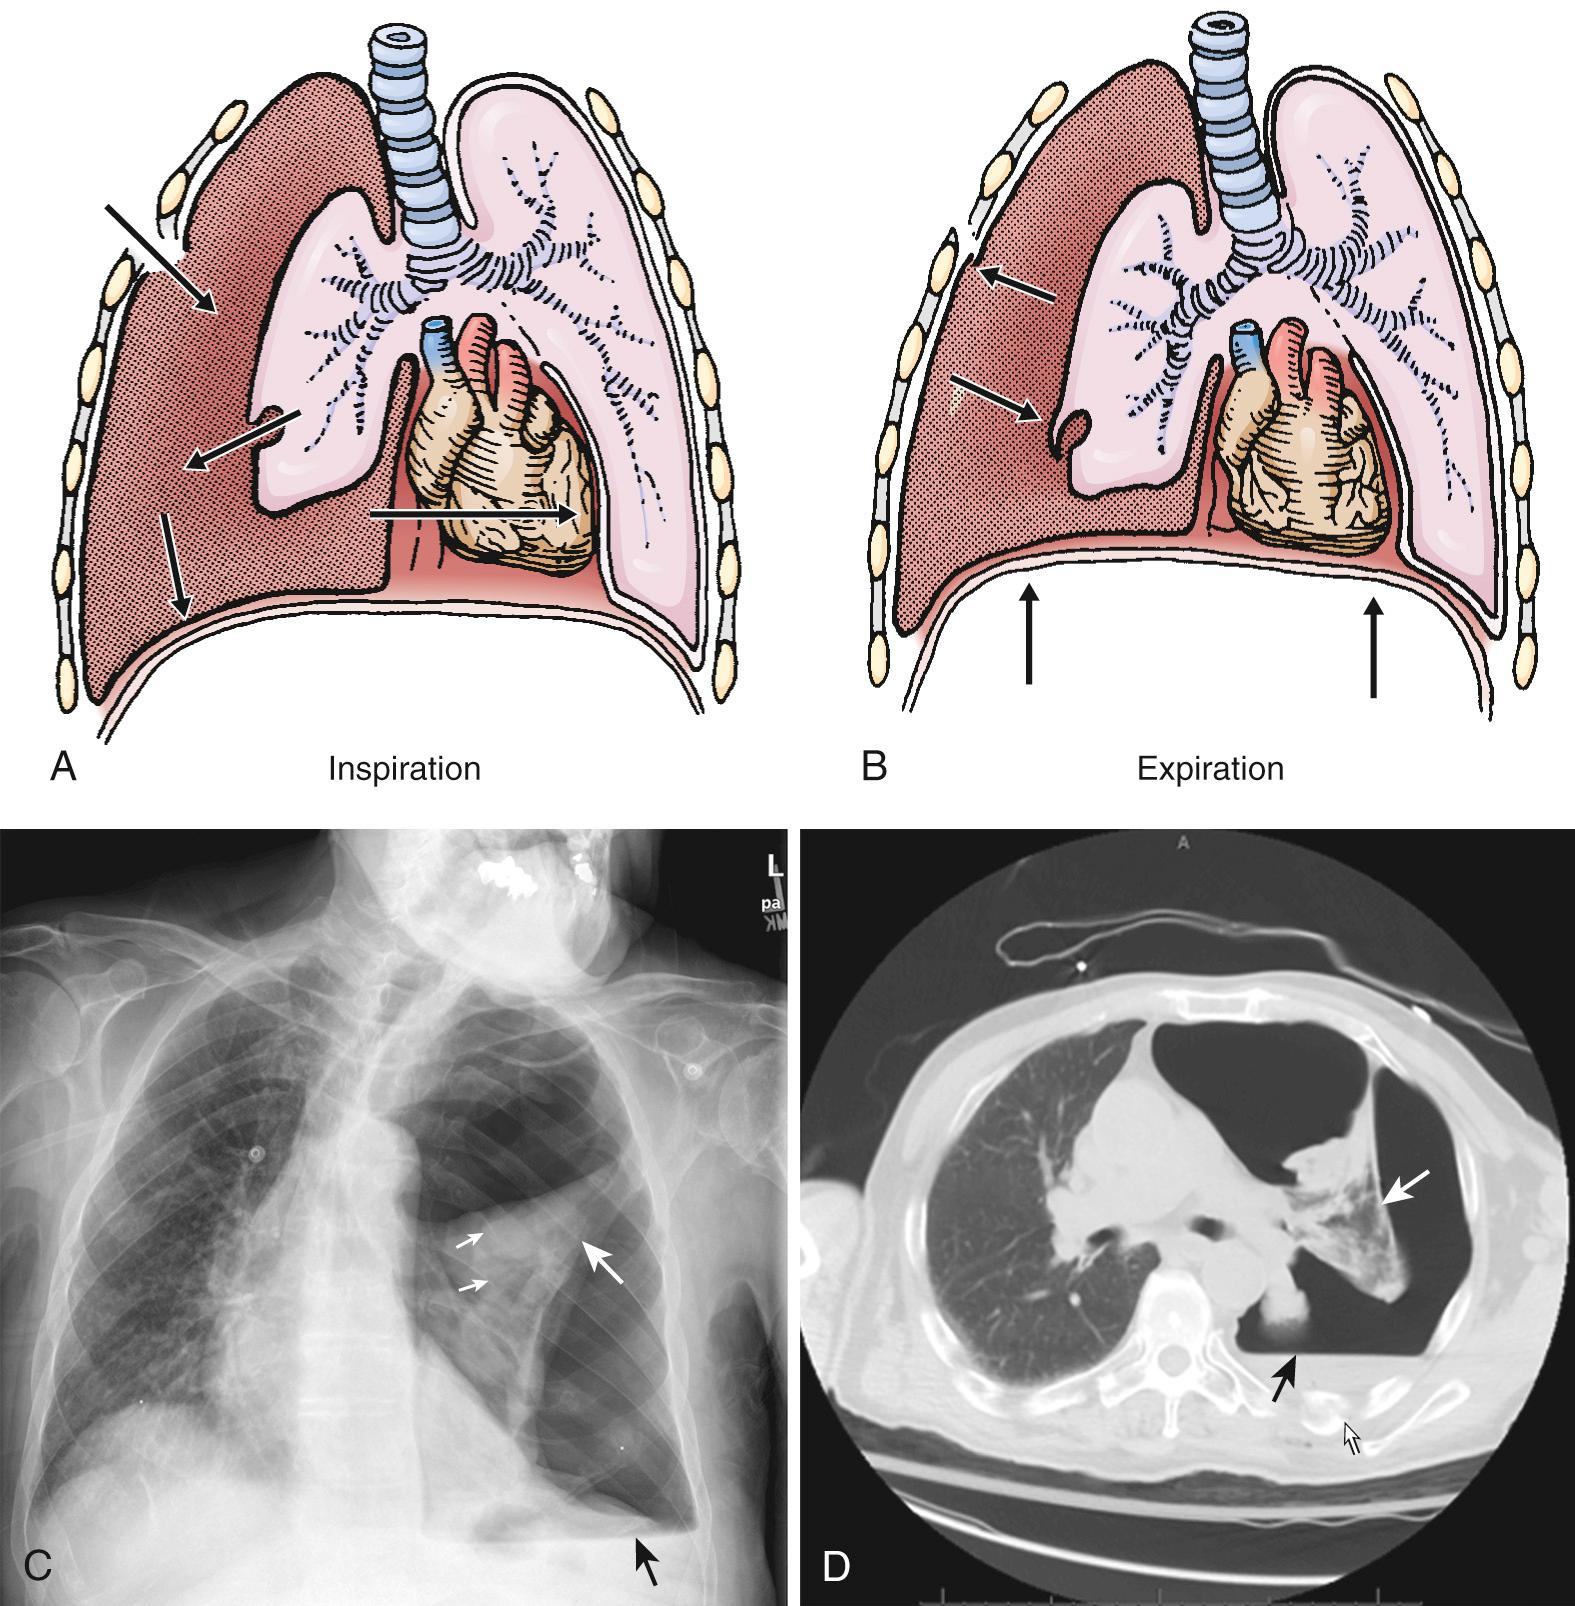 Figure 10.4, Traumatic tension pneumothorax. A and B, Pathophysiology of a tension pneumothorax. During inspiration, air enters the pleural space through a one-way valve either from the outside or from the lung itself. On expiration, the injury/valve closes and traps increasing amounts of air in the pleural space. Eventually, the mediastinum shifts and cardiac filling and ultimately cardiac output are compromised. C, This elderly patient sustained a tension hemopneumothorax after slipping and falling on ice. The left hemithorax is very dark (radiolucent) because of total collapse of the left lung (large white arrow). Note the dramatic shift of the mediastinum to the right, indicative of tension. Multiple posterior rib fractures are present but are difficult to appreciate on this film (small white arrows). The air-fluid level (black arrow) indicates the presence of air in the pleural cavity in addition to fluid (blood). D, A computed tomography scan of the same patient again demonstrates the findings seen on the conventional radiograph.